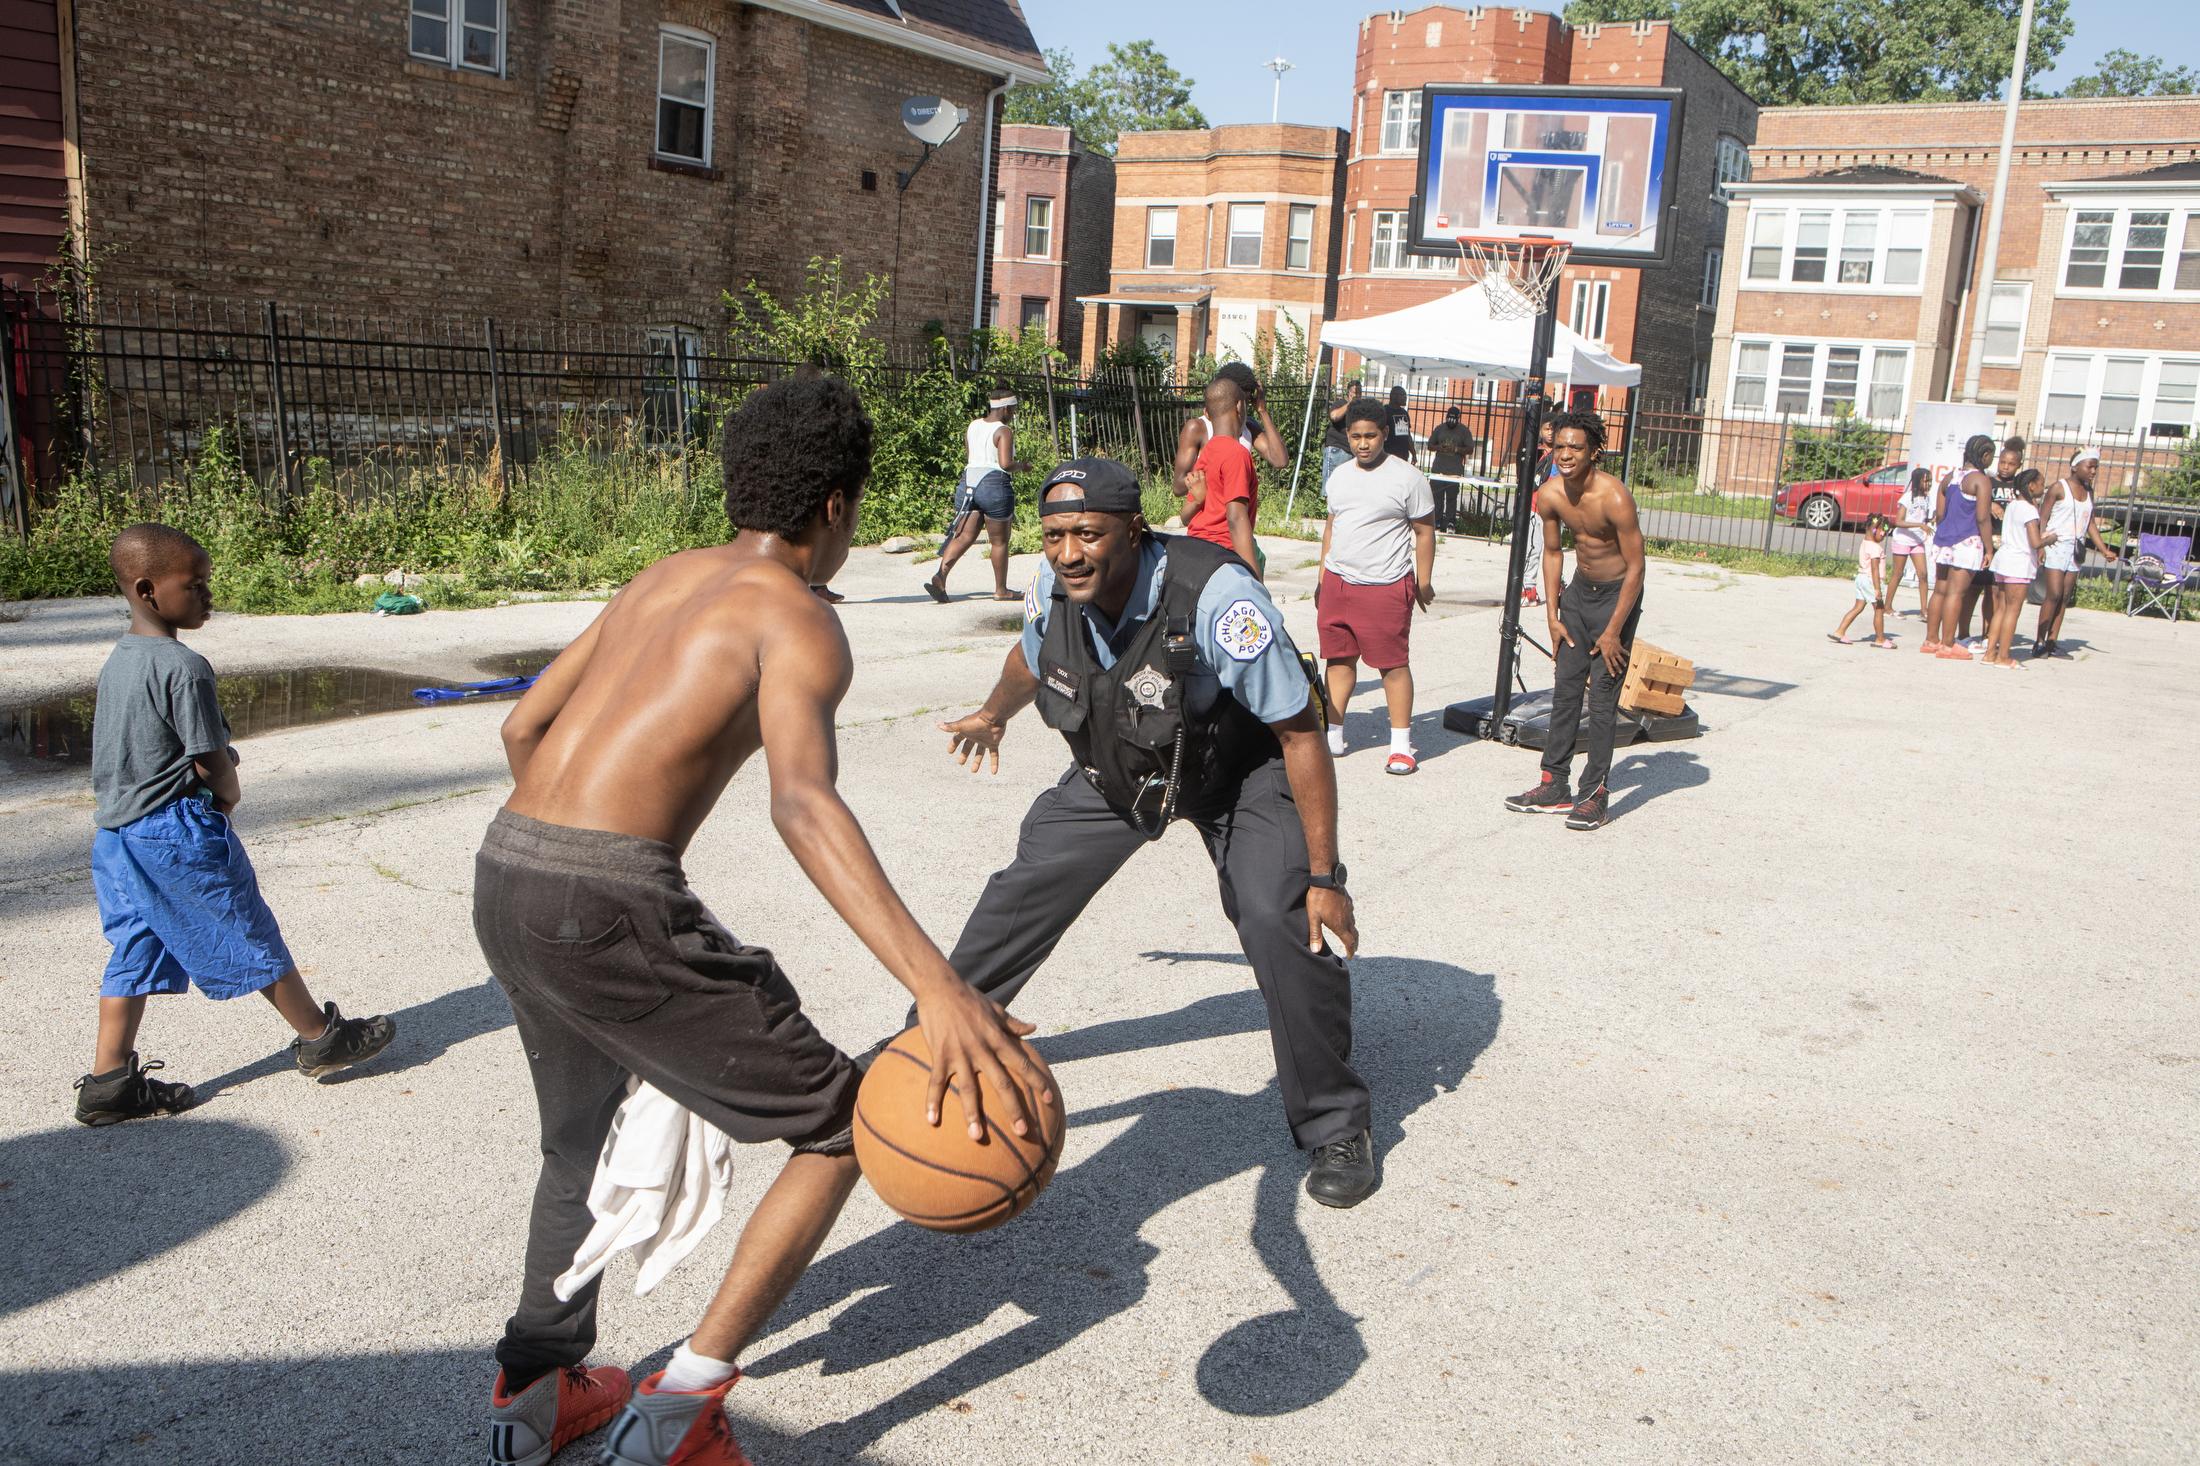 10 years in a boxing gym - CPD Officer Cook playing basketball with the Crushers...